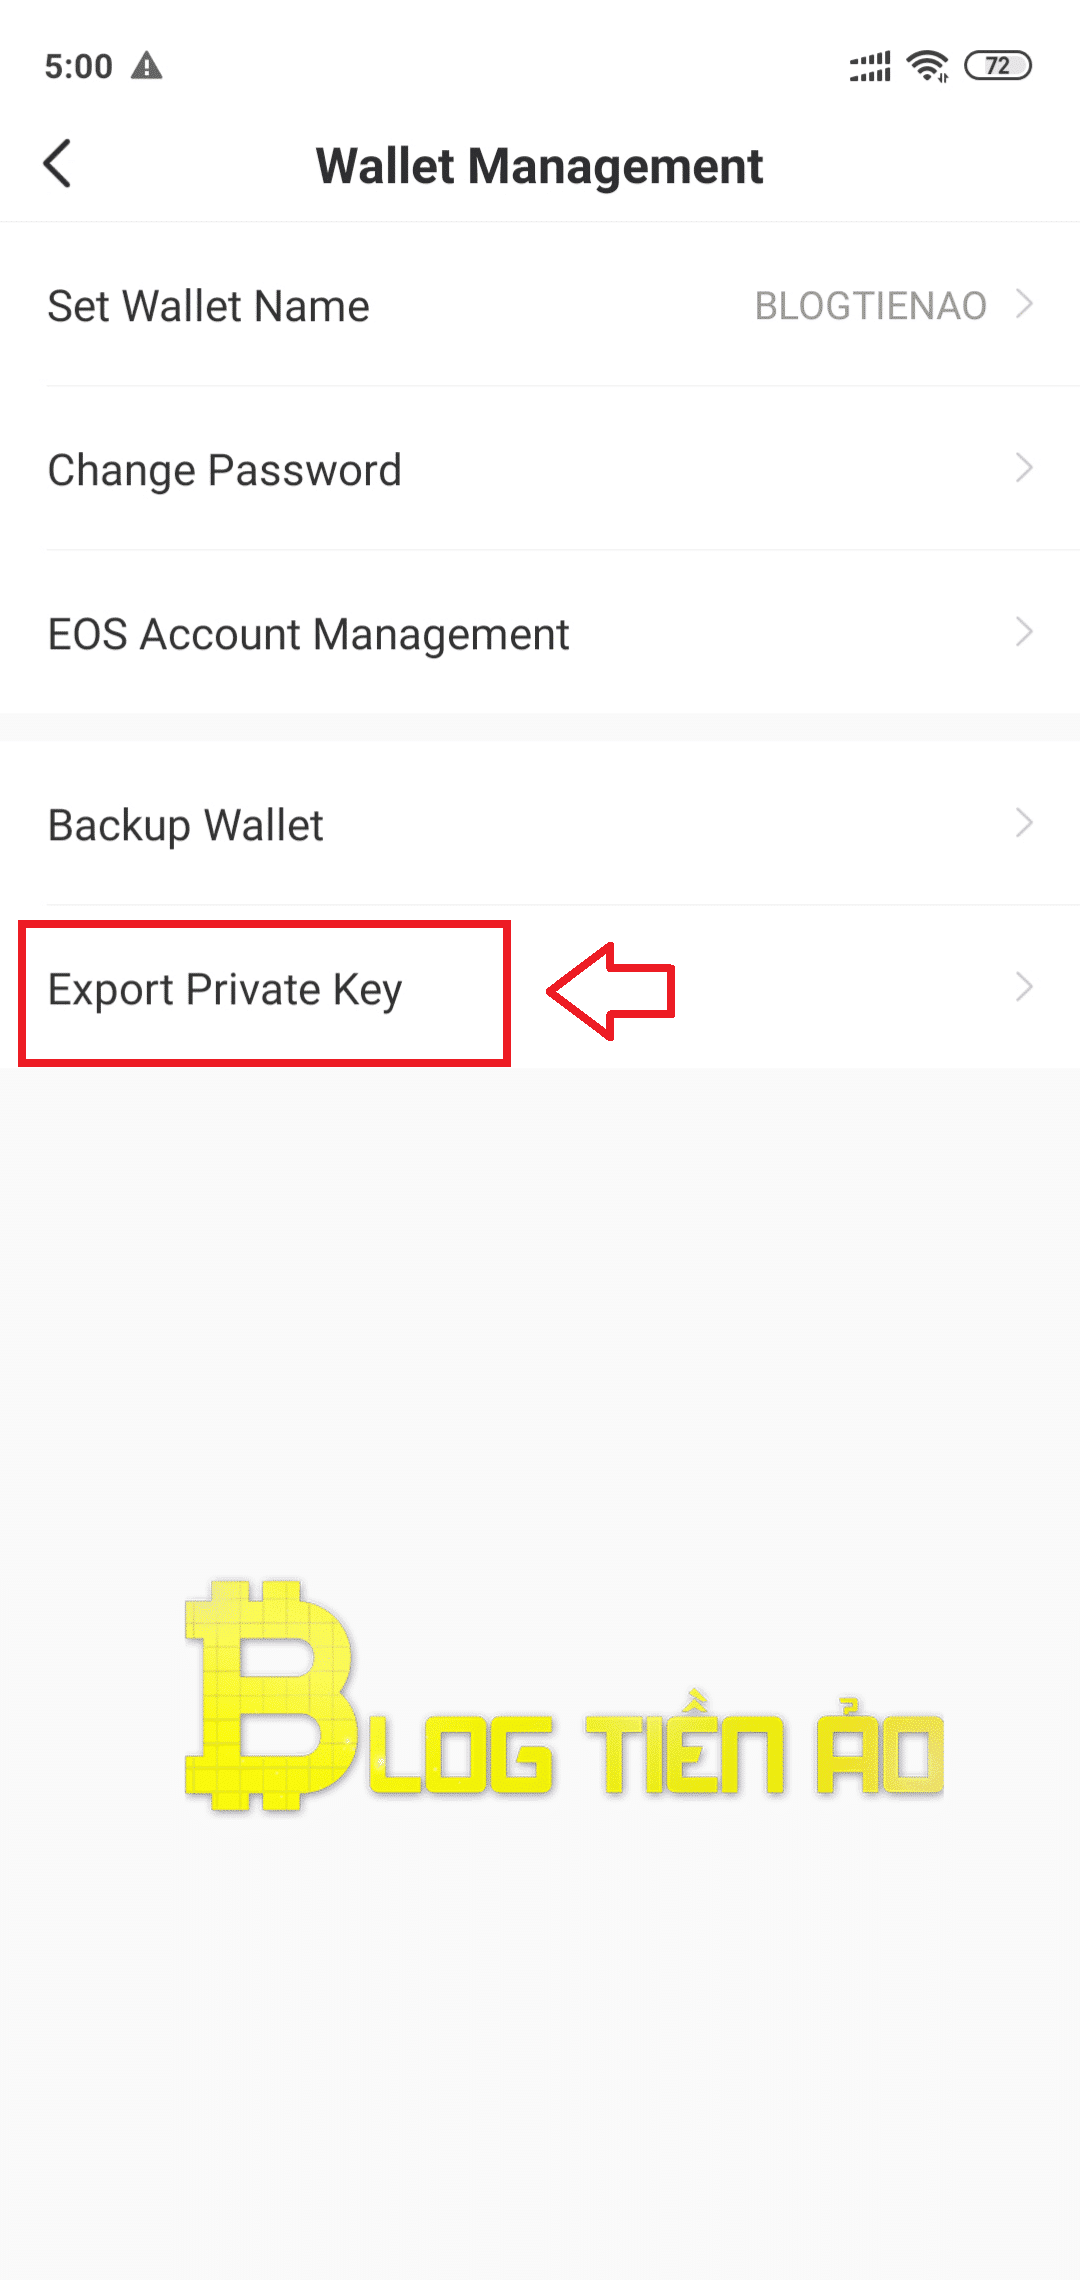 Export private key